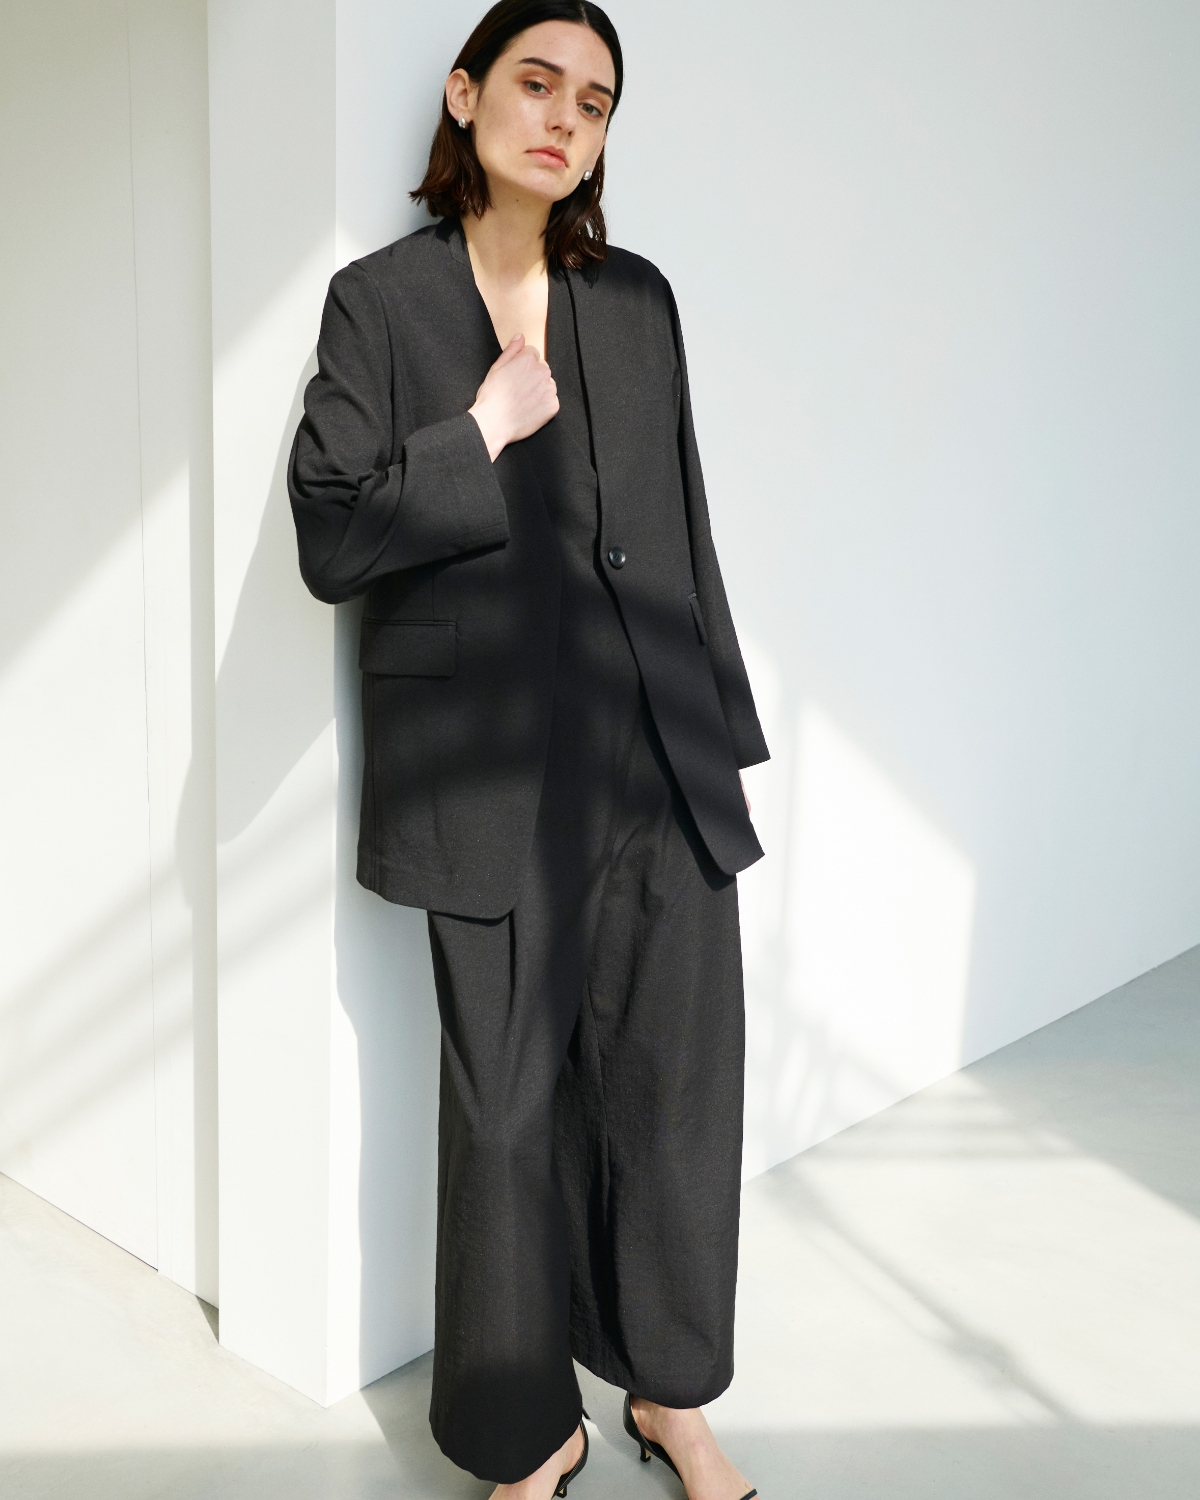 Not Just Comfort Linen for the City LINEN OX Collectionを着用している女性モデル10